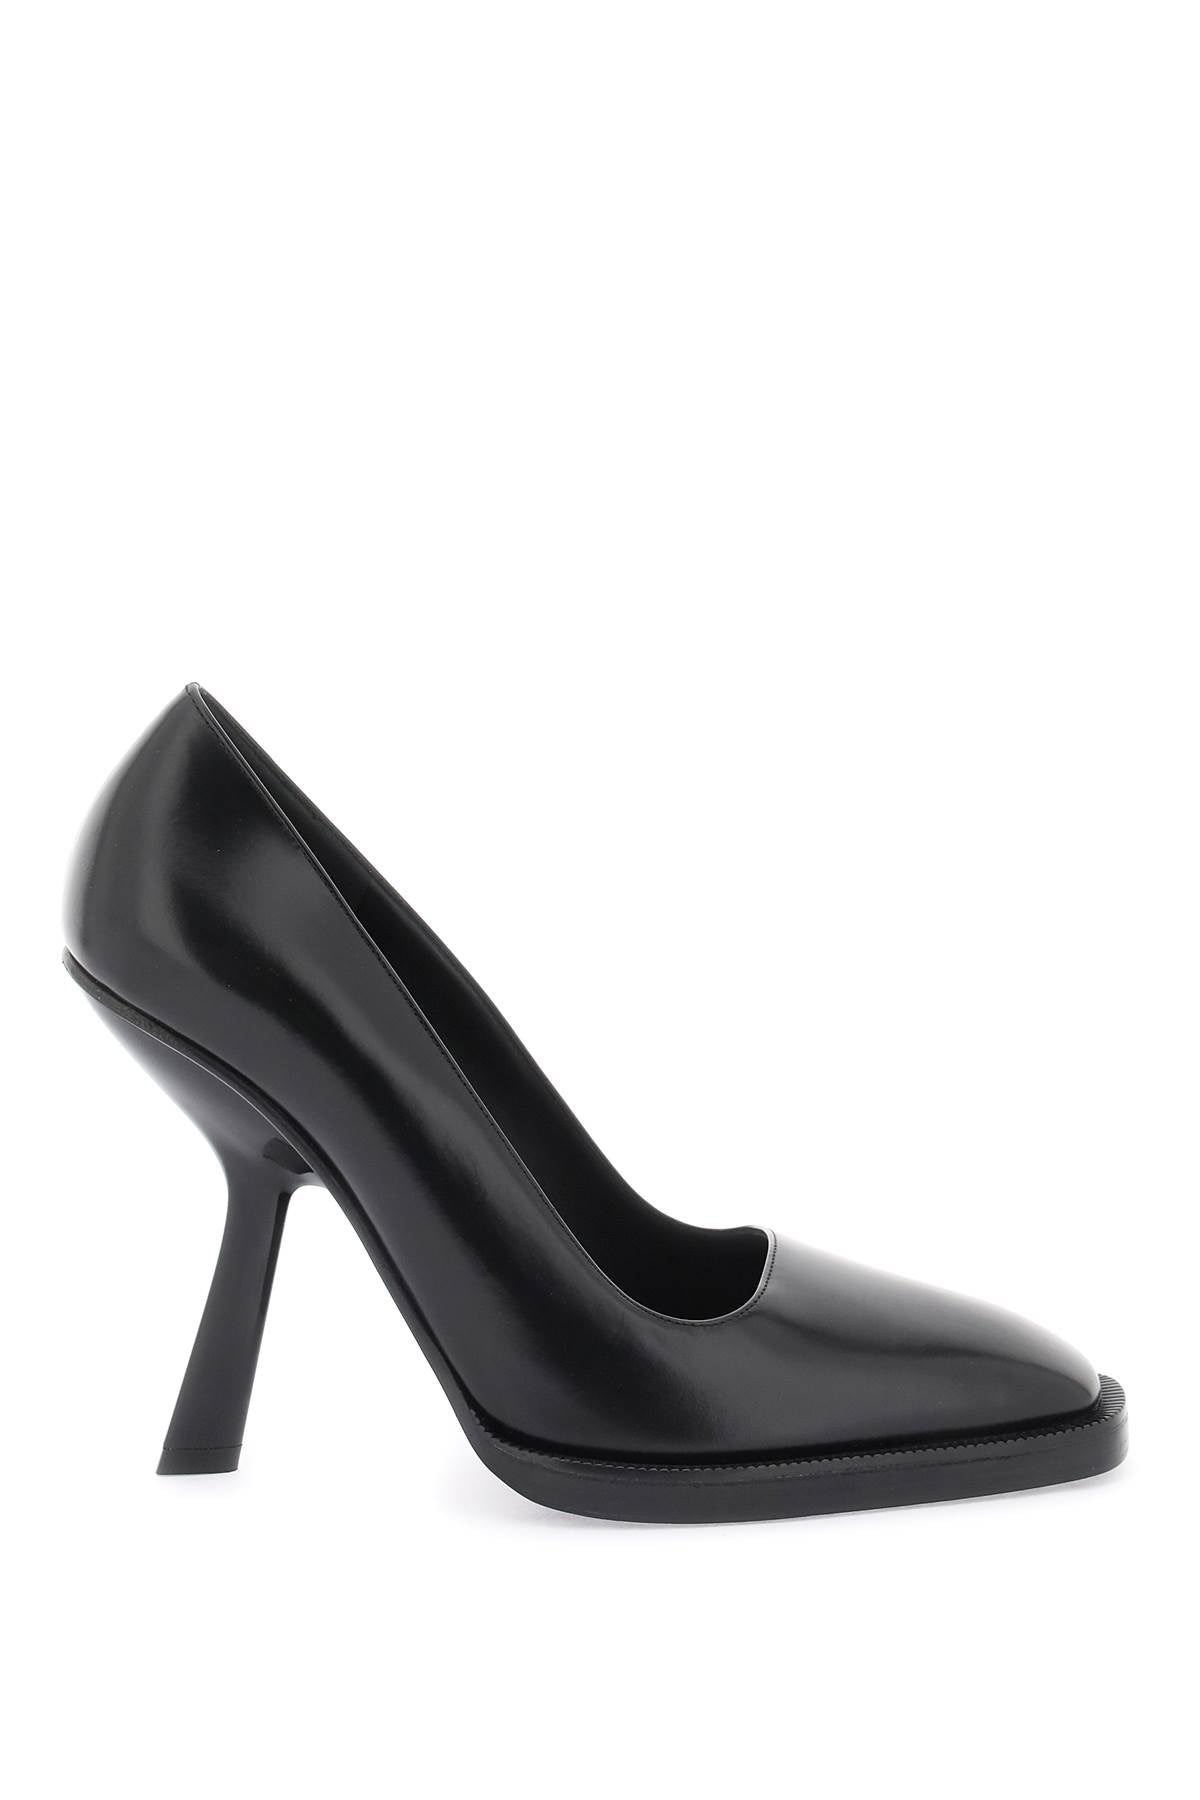 Ferragamo Black Leather Pumps with Shaped Heel for Women - FW23 Collection